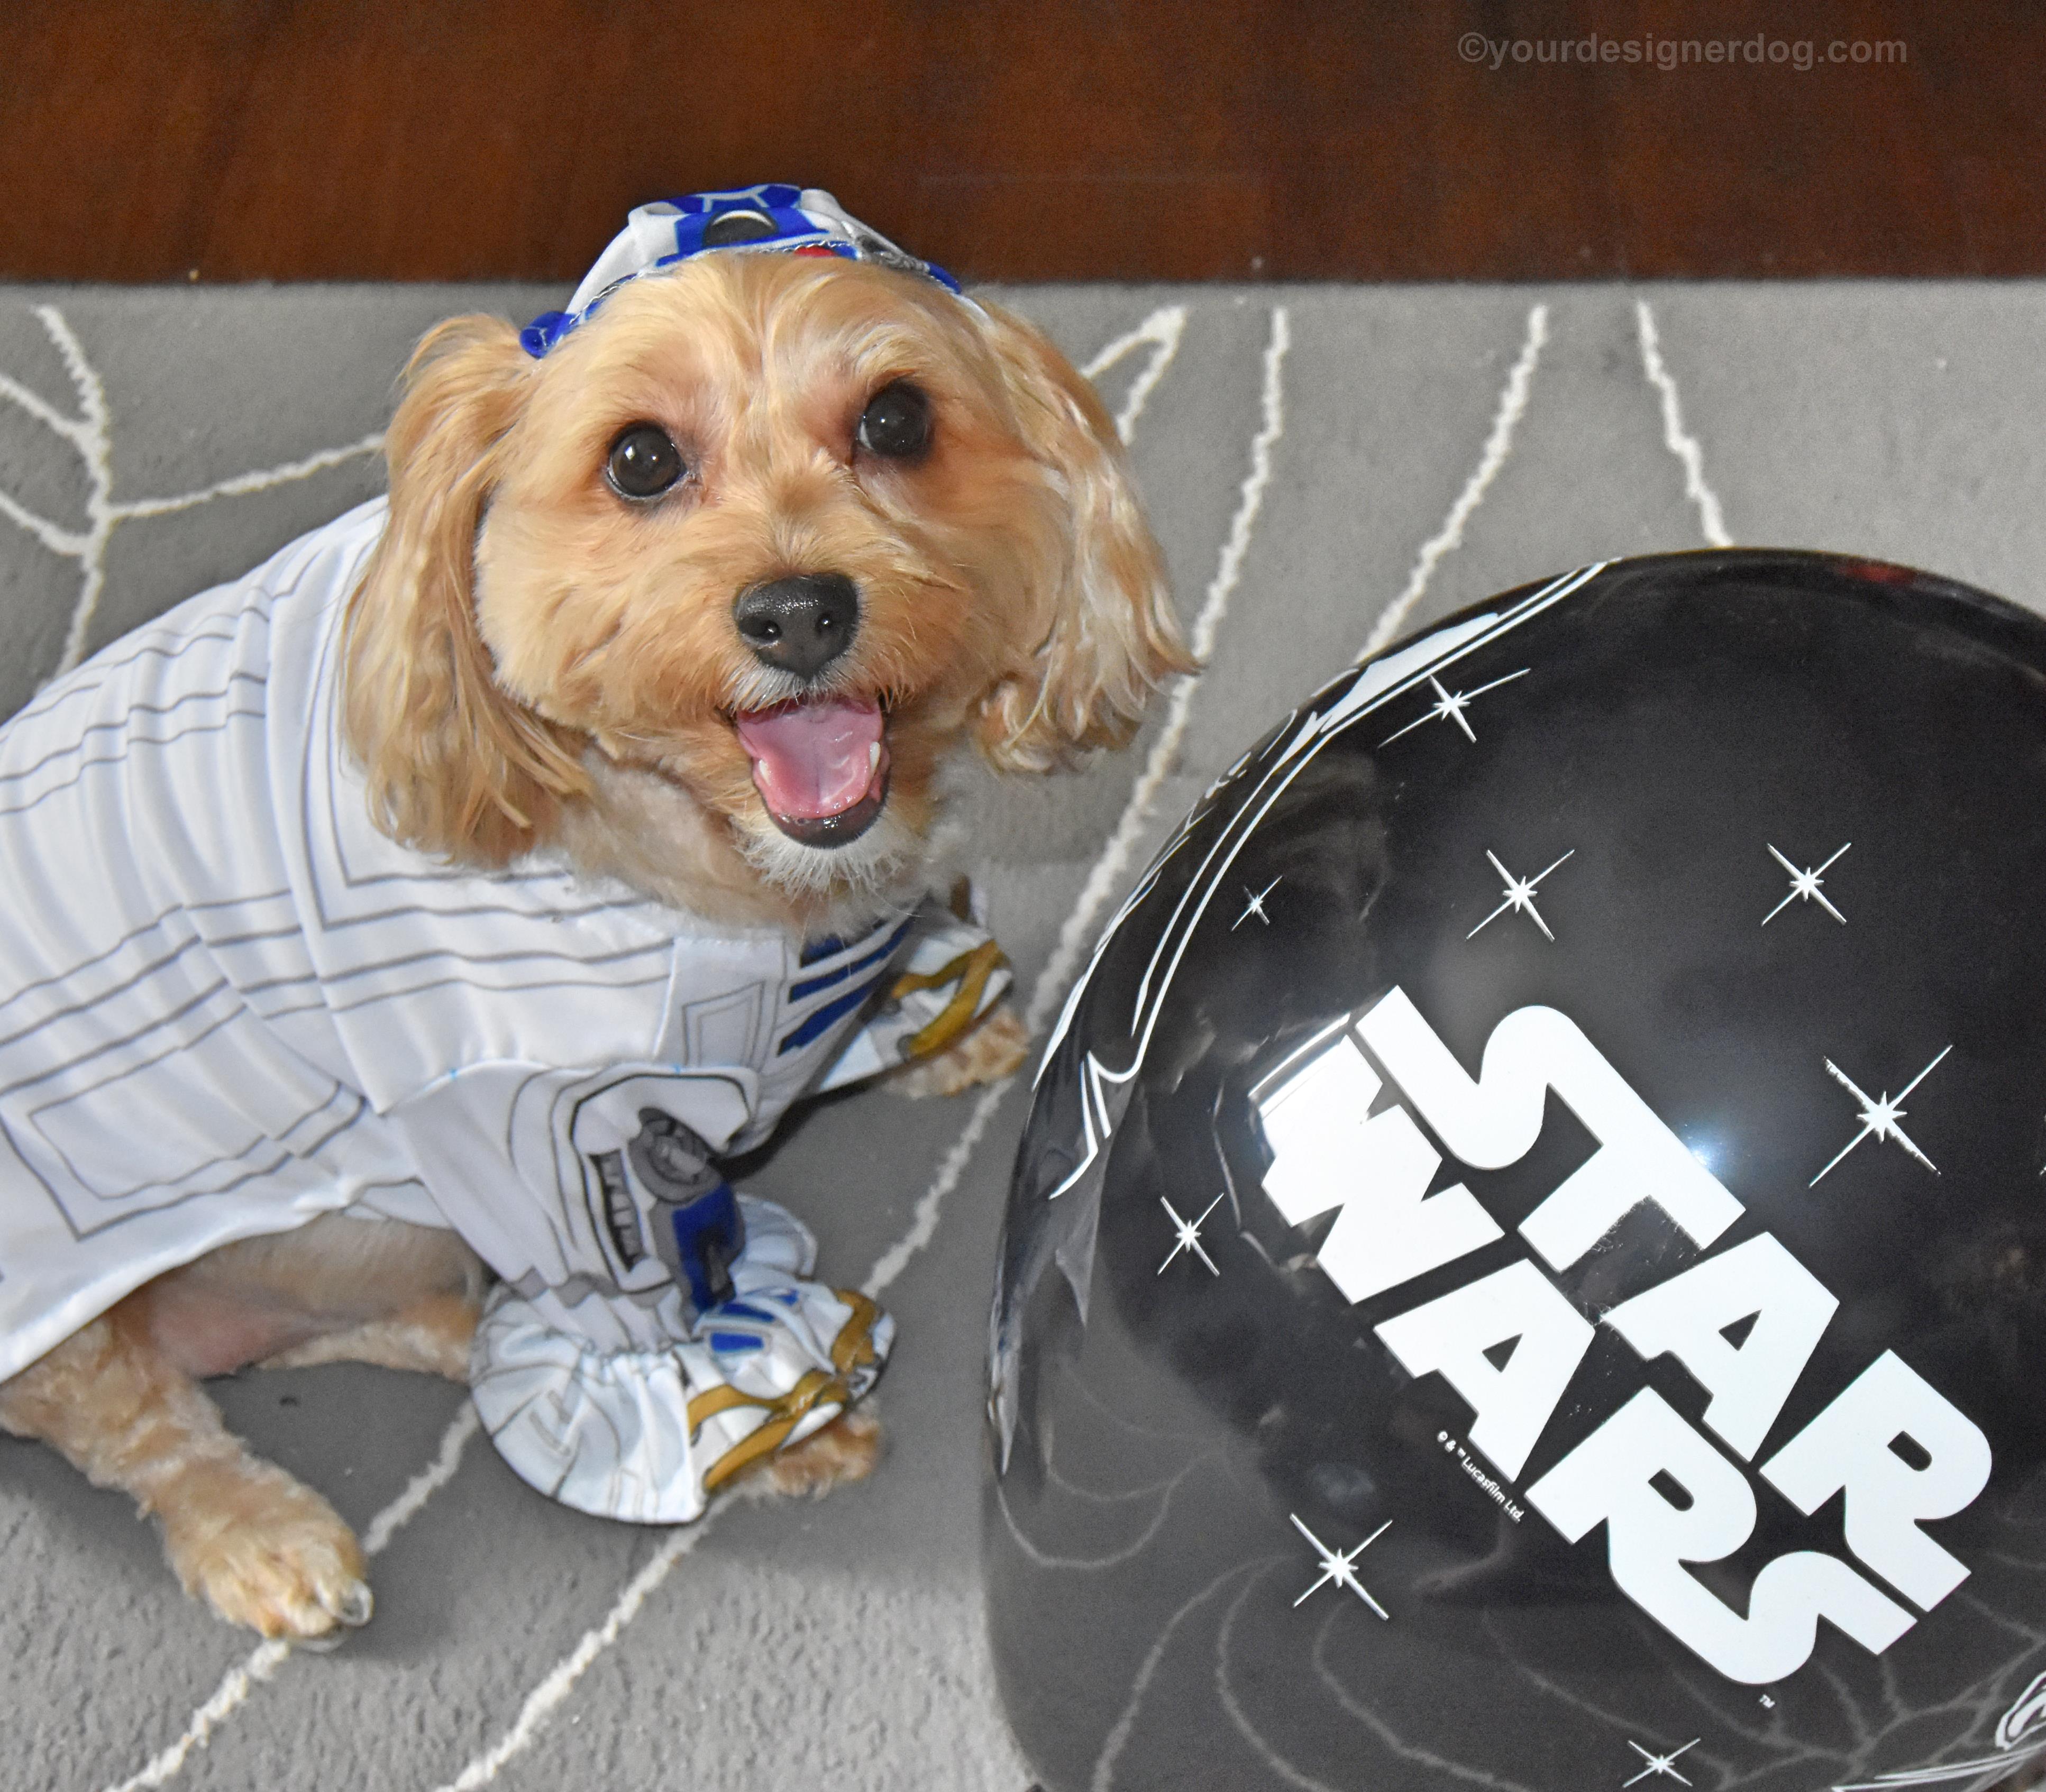 dogs, designer dogs, Yorkipoo, yorkie poo, R2D2, Star Wars, balloons, tongue out